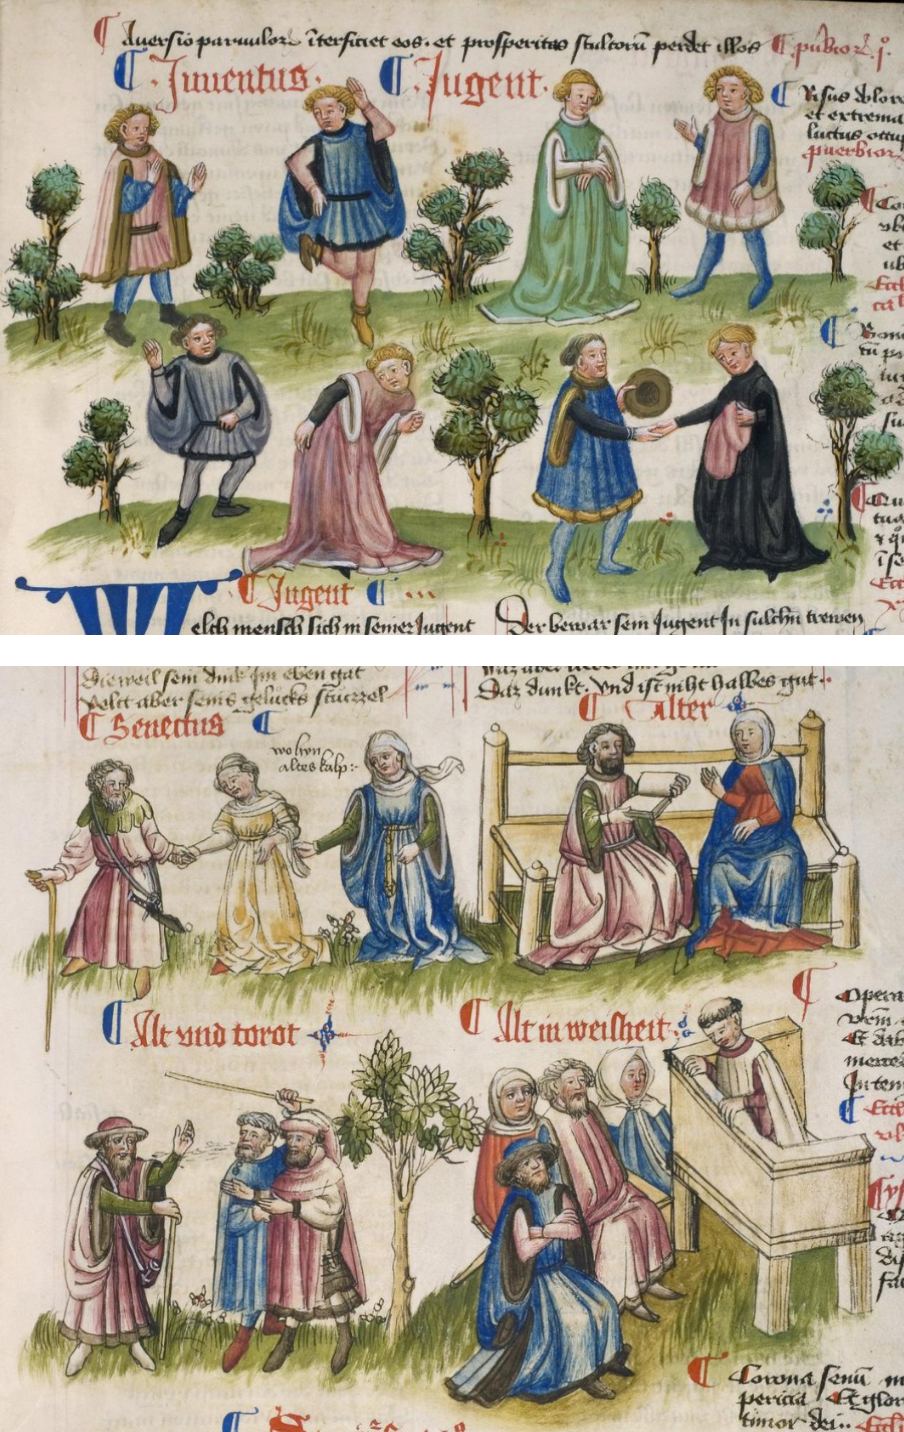 The stages of life from youth to old age from Cod. pal. germ. 471.